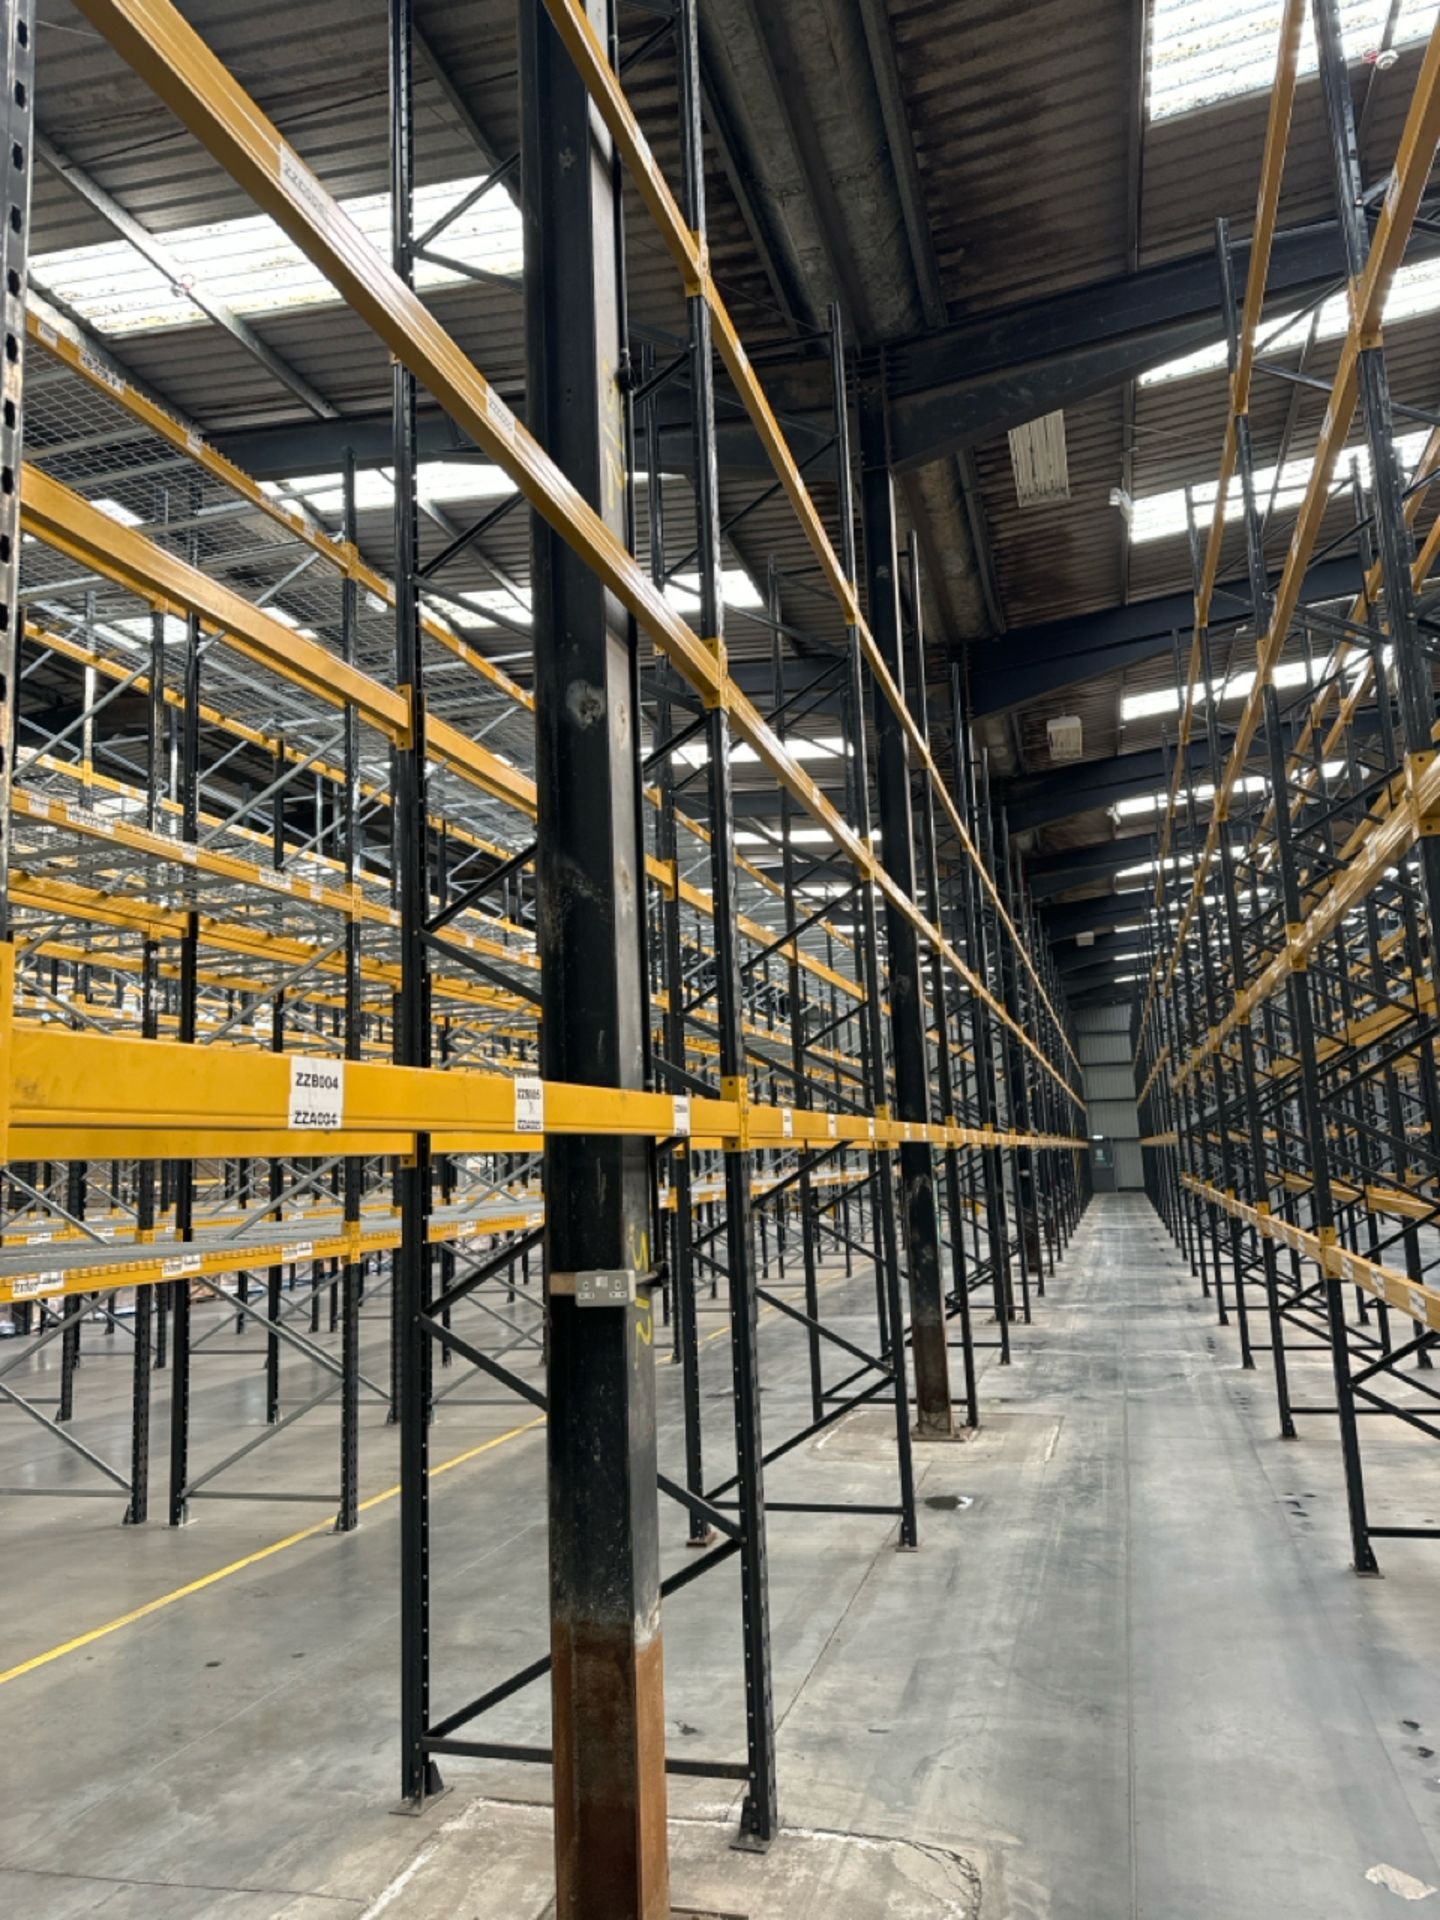 20 Bays Of Boltless Industrial Pallet Racking - Image 5 of 9